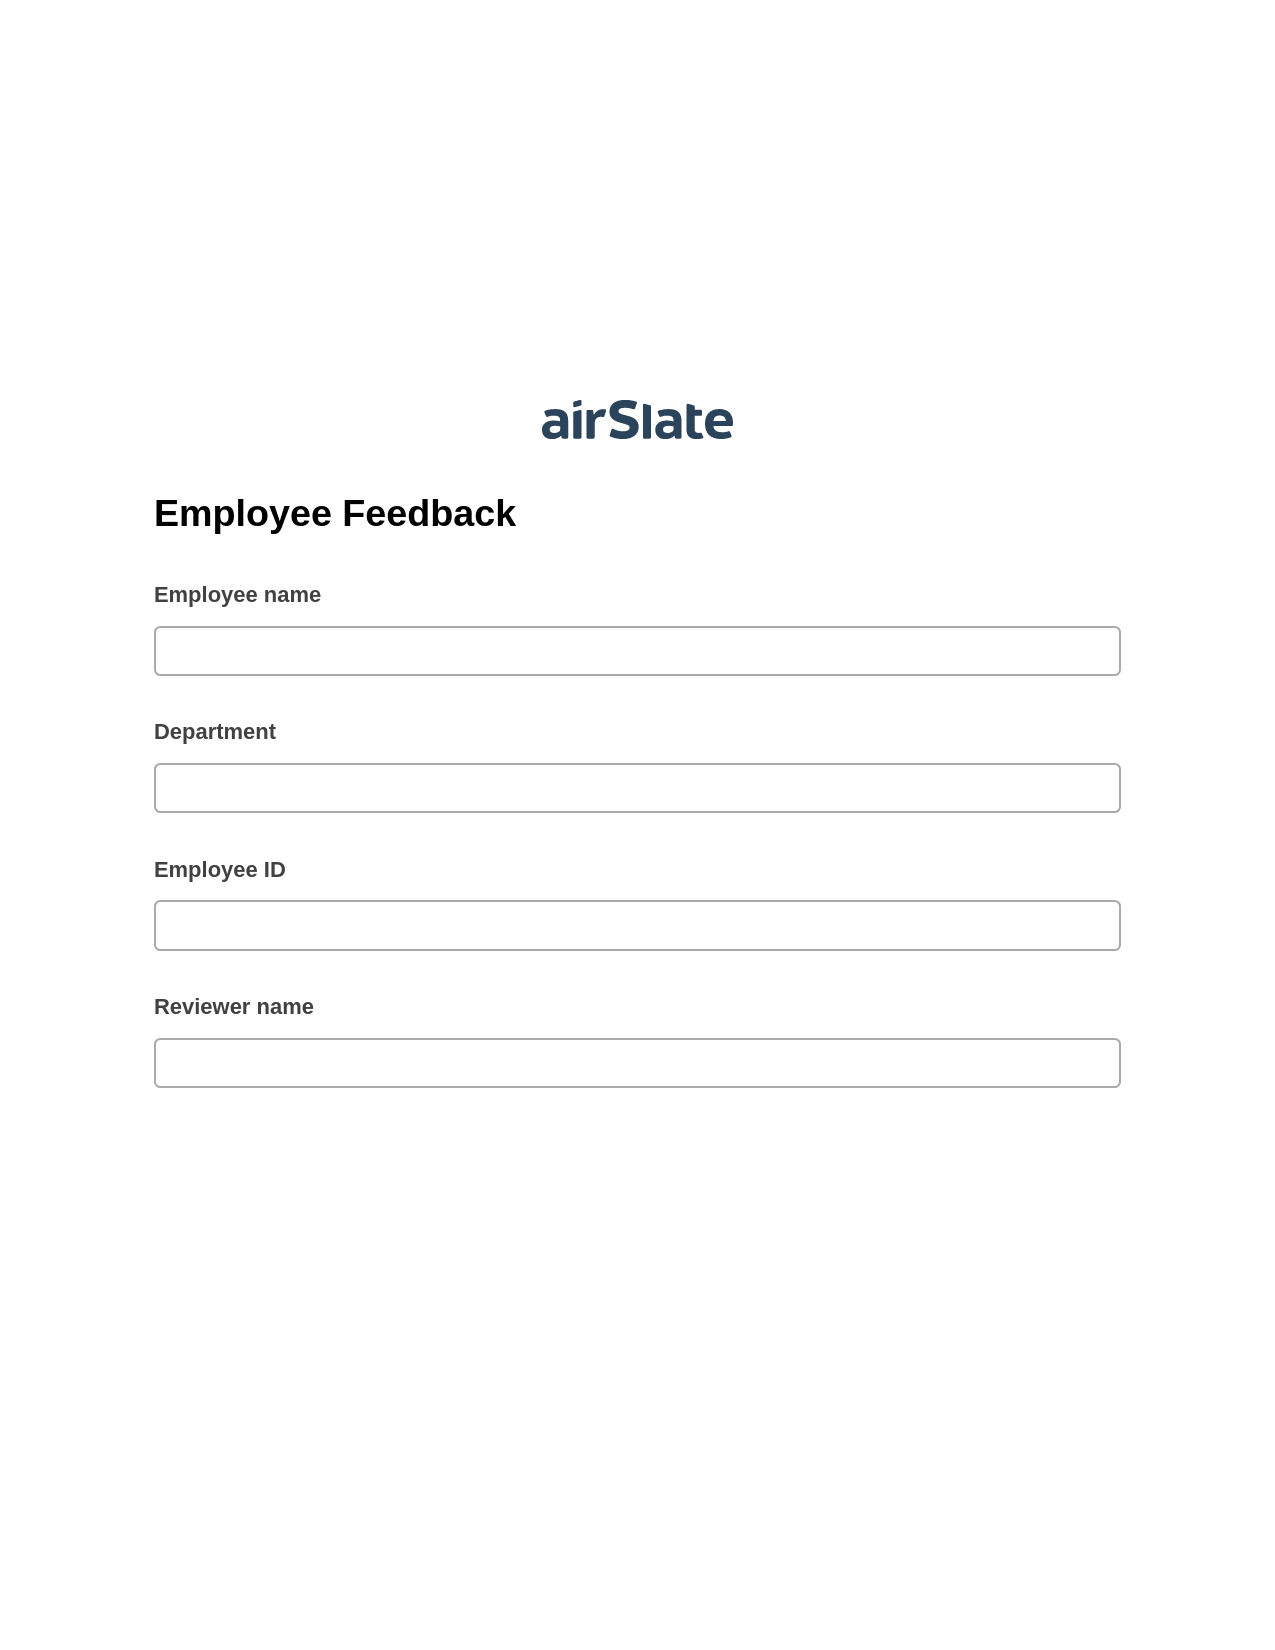 Employee Feedback Pre-fill from Salesforce Records with SOQL Bot, Reminder Bot, Box Bot